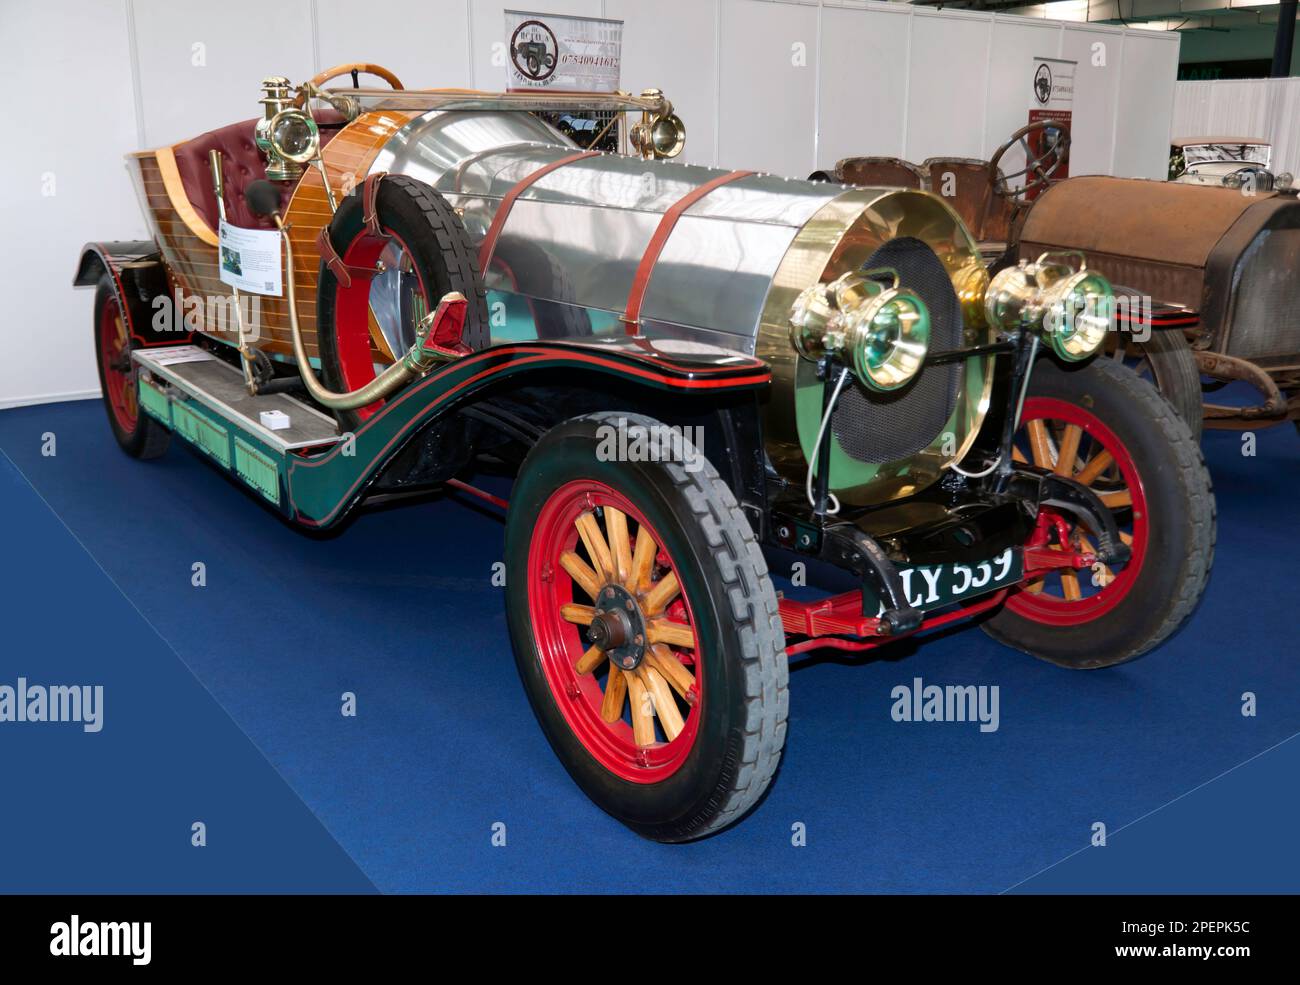 A recreation of the famous Chitty Chitty Bang Bang, from the film of the same name, on display at the Model A Revival Company stand, Olympia Stock Photo